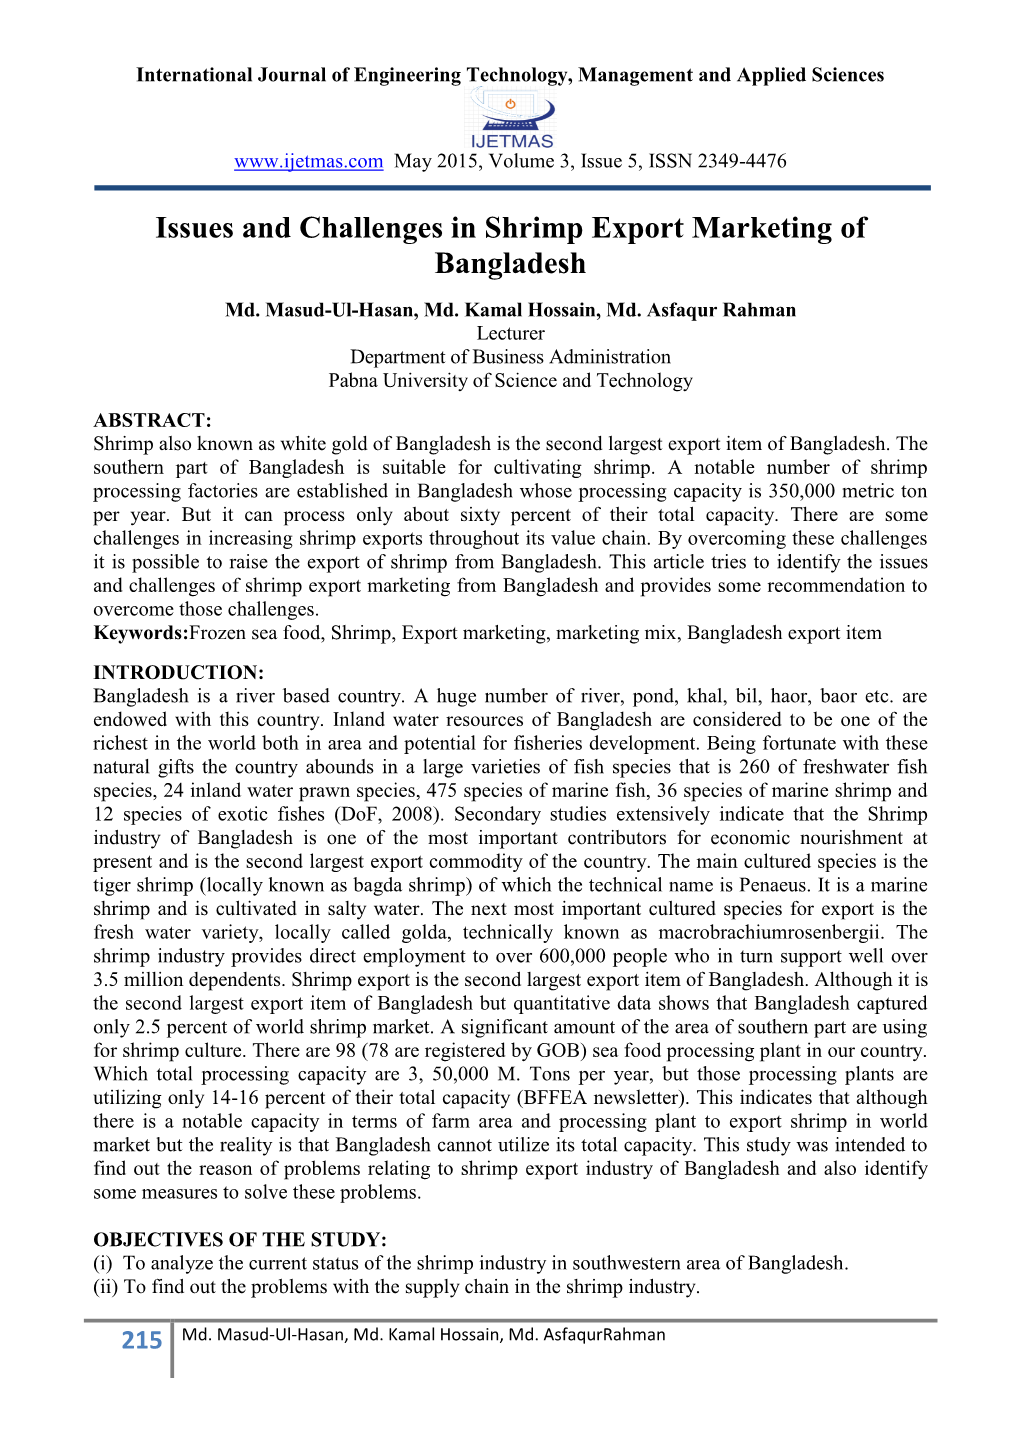 Issues and Challenges in Shrimp Export Marketing of Bangladesh